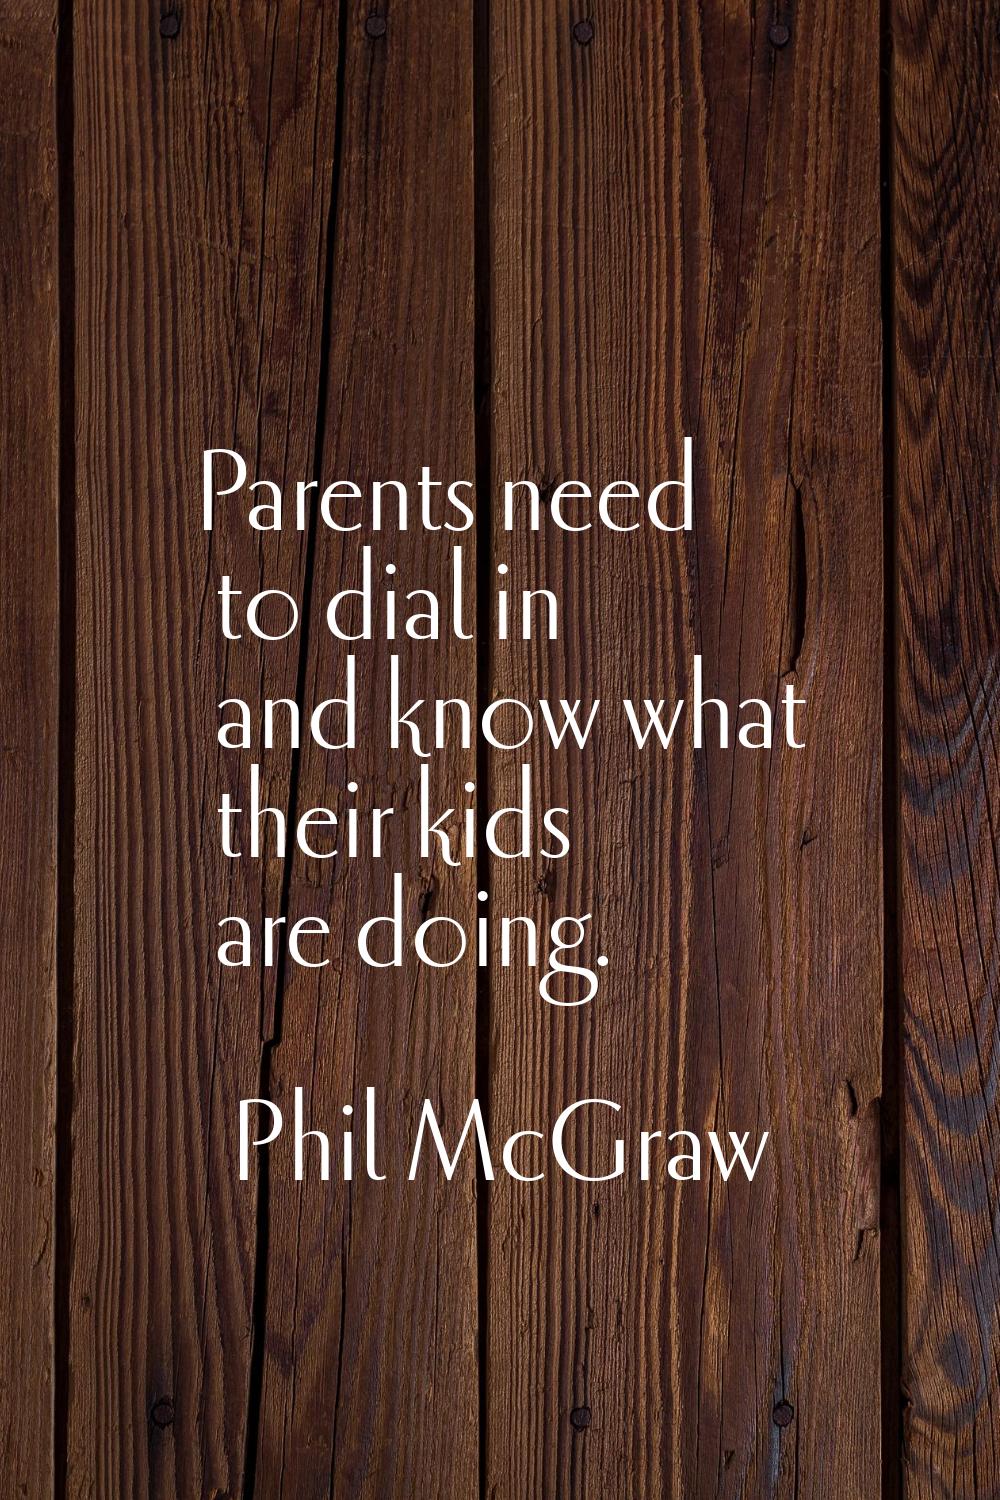 Parents need to dial in and know what their kids are doing.